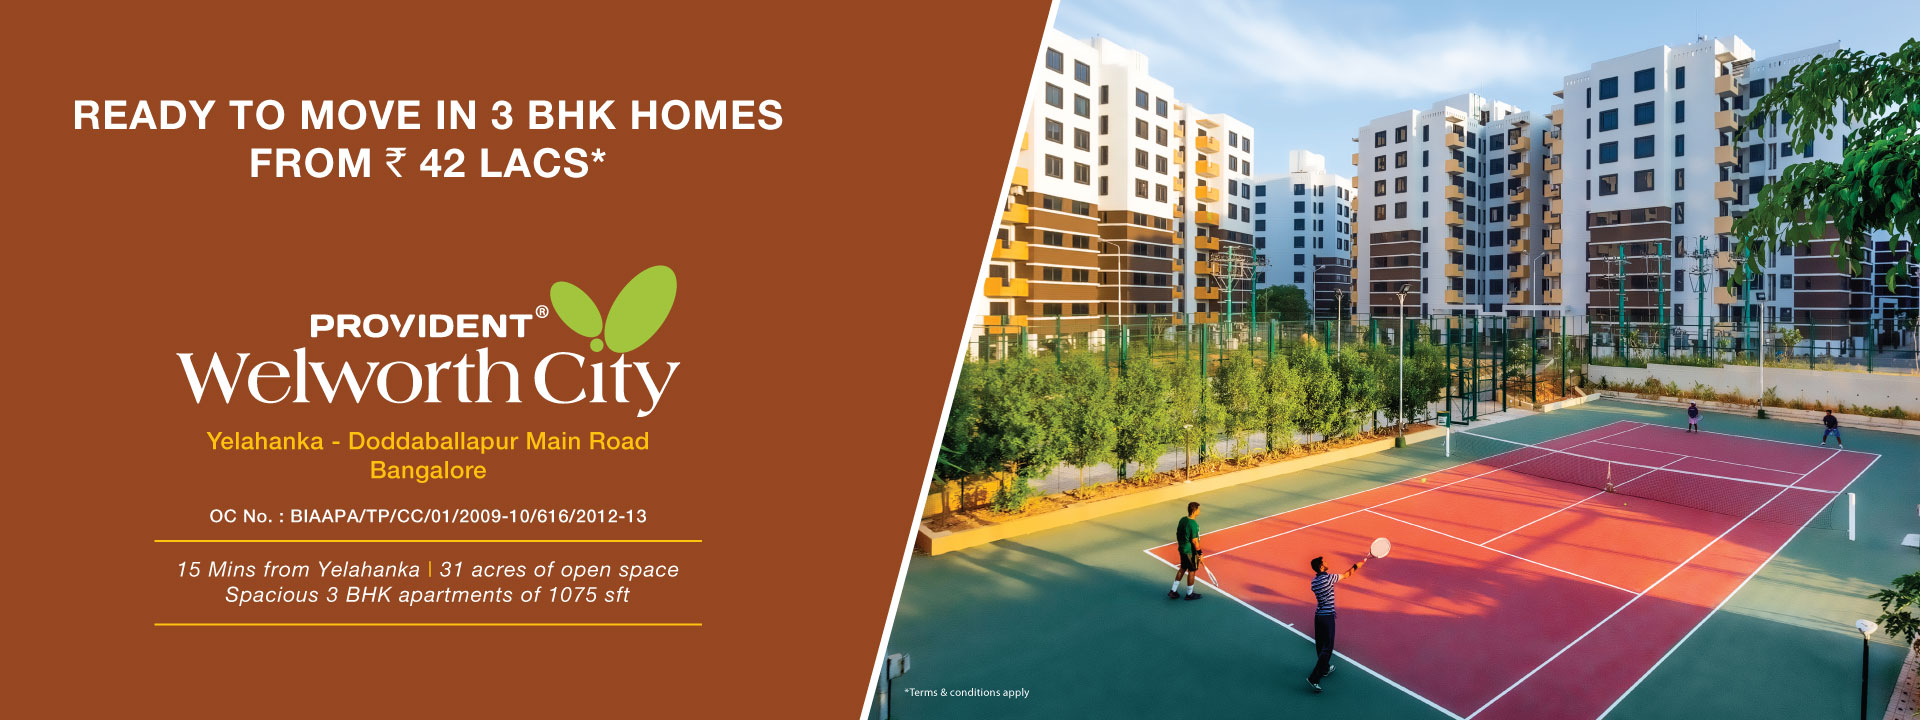 Ready to move in 3 BHK homes from Rs 42 Lacs at Provident Welworth City in Bangalore